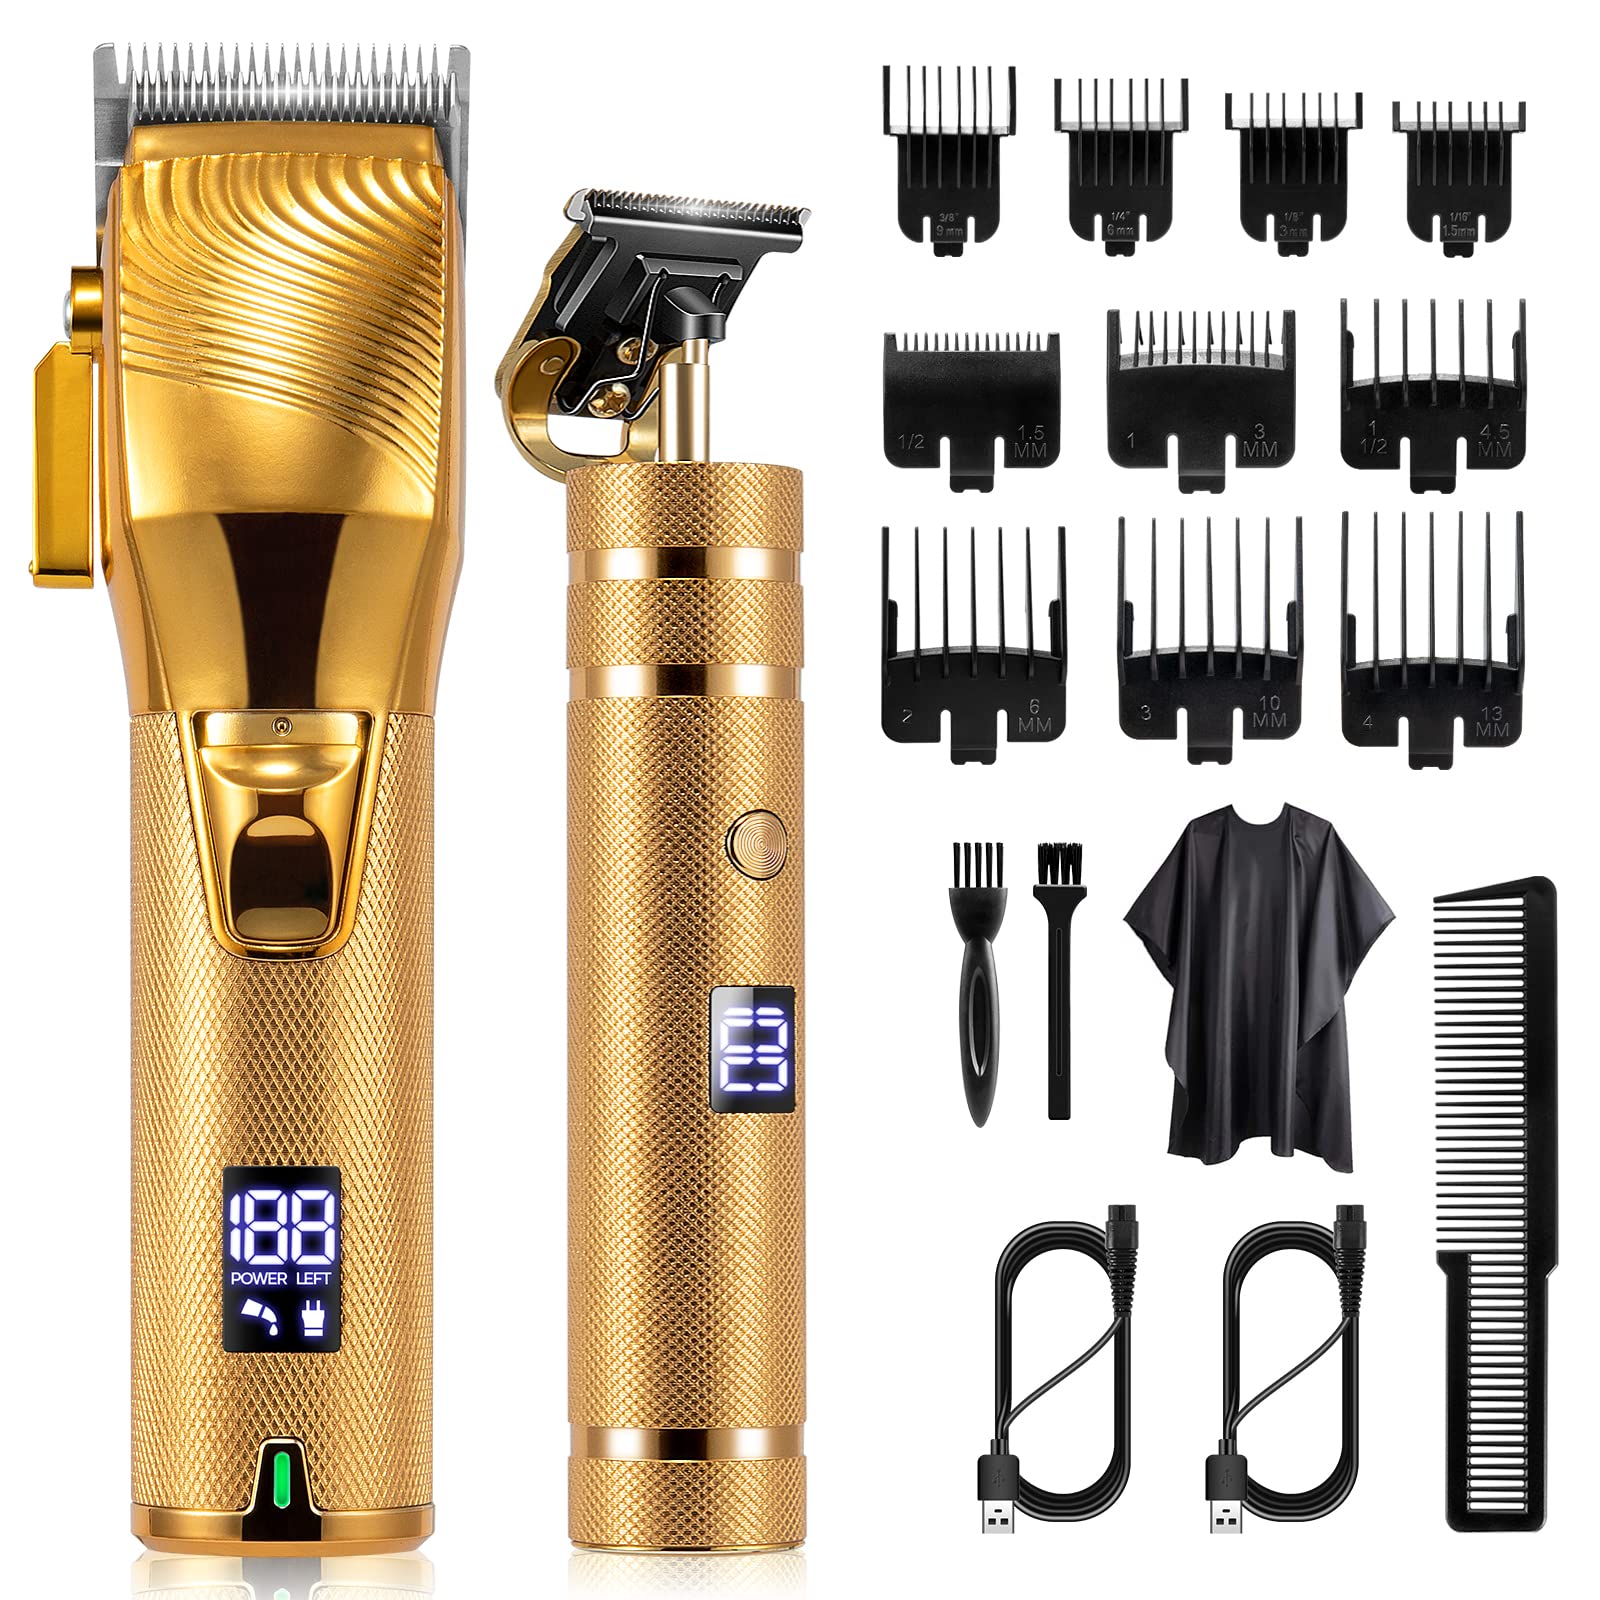 Hair Clippers For Men Cordless, Hair Clippers Men Cordless, Barber